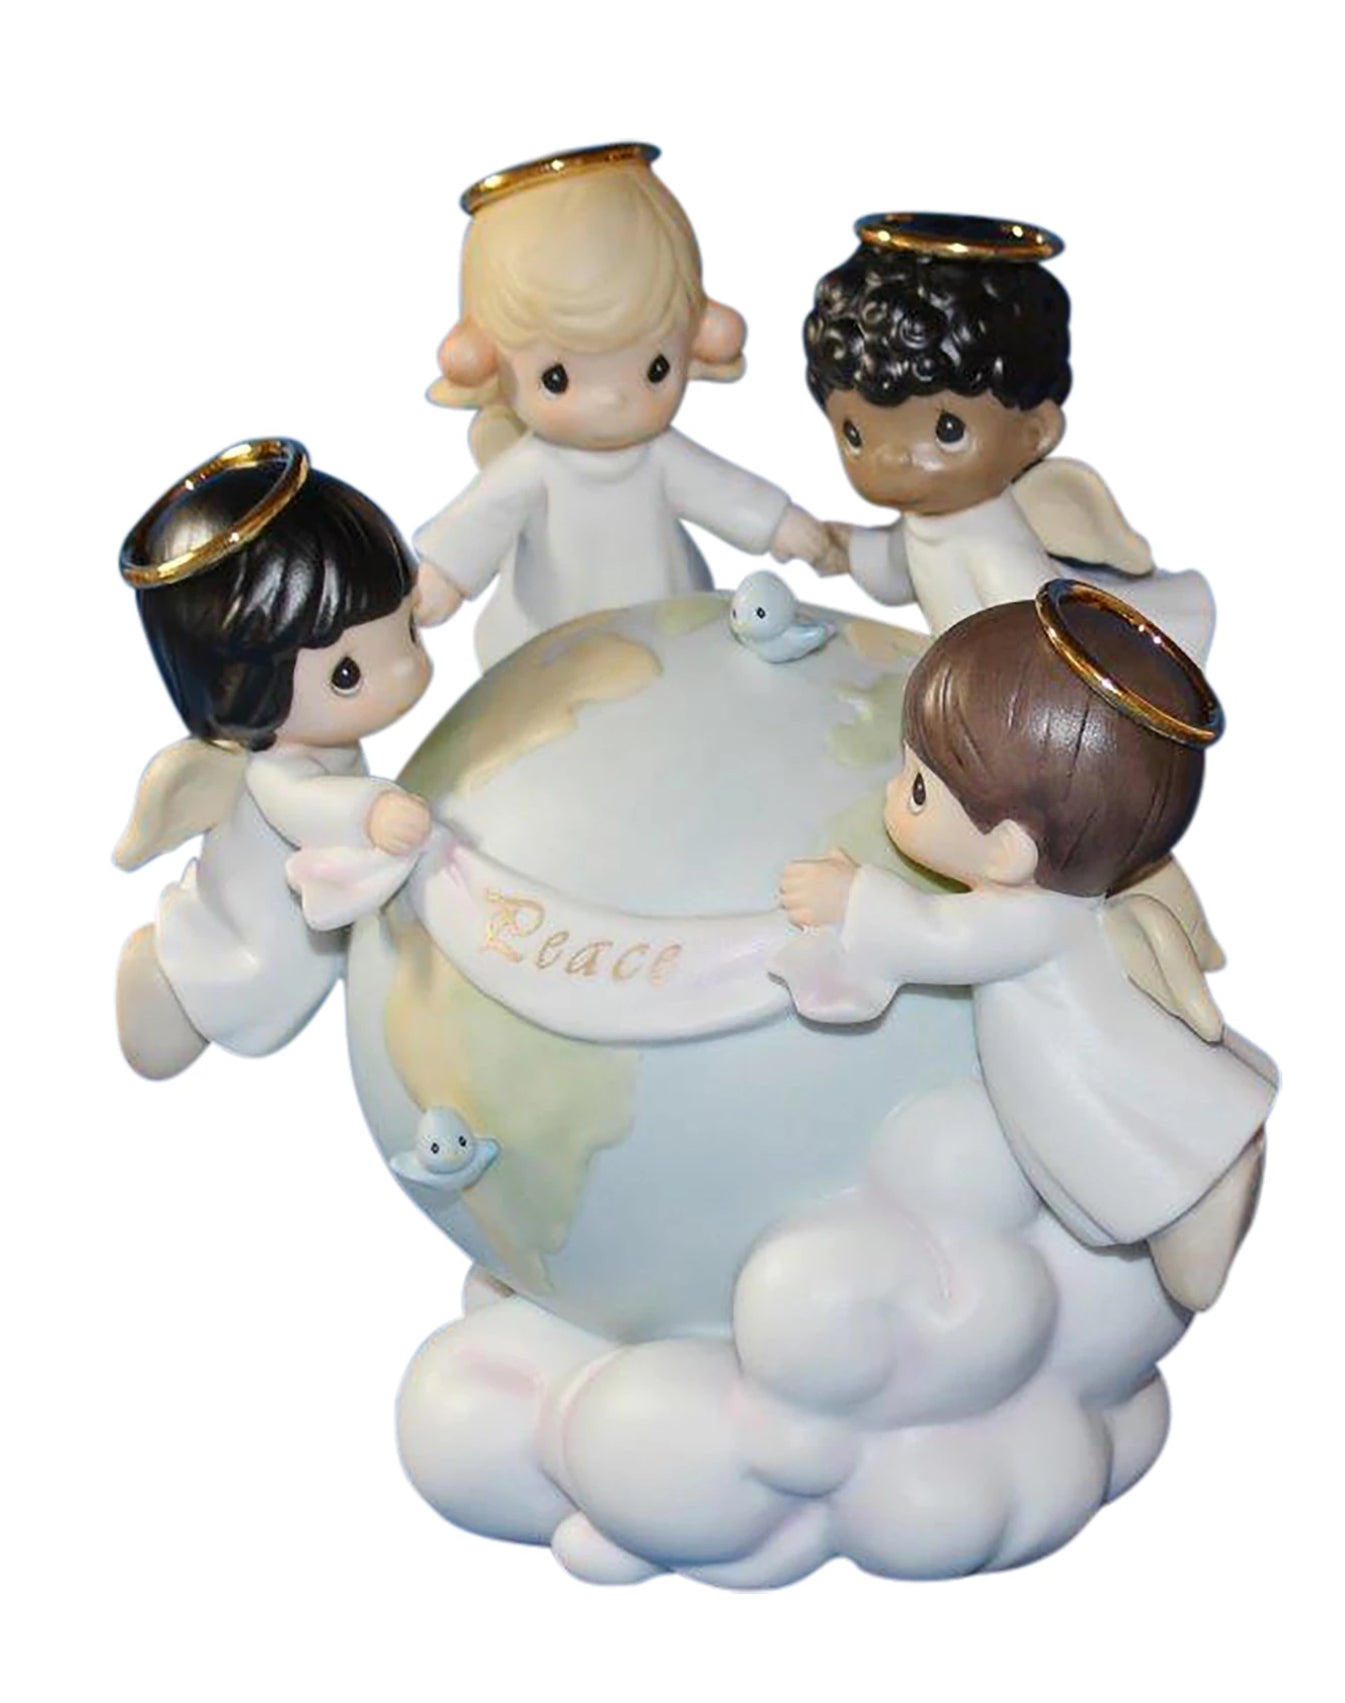 His Love Will Uphold The World - Precious Moment Figurine